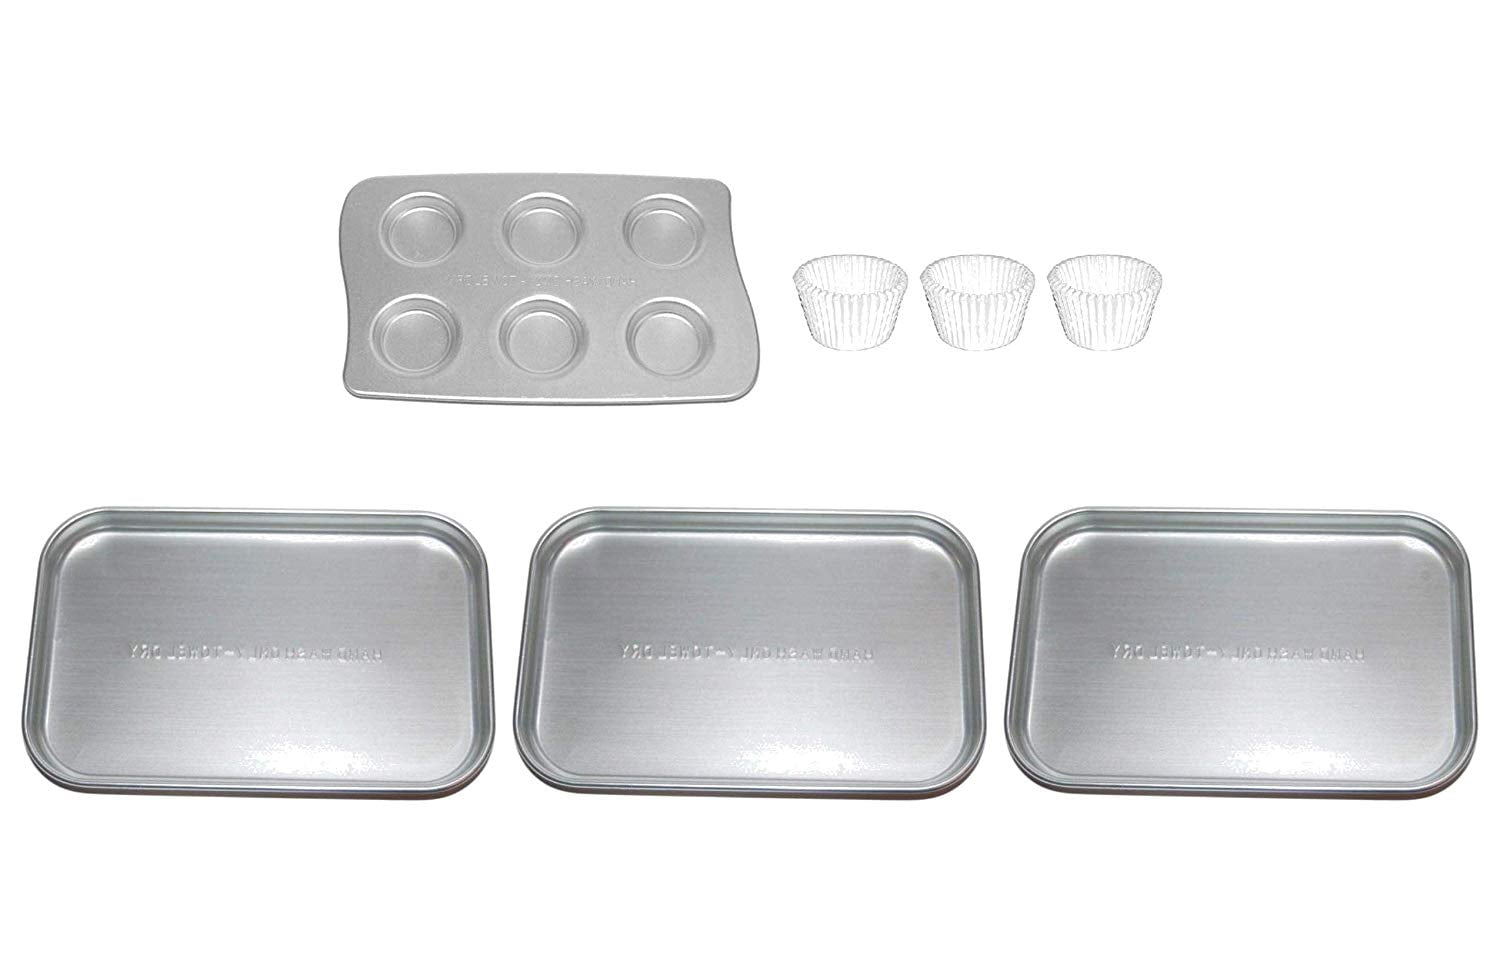 Replacements NEW EASY-BAKE Ultimate Oven Cupcake Pan and Cupcake Wrap Refill 